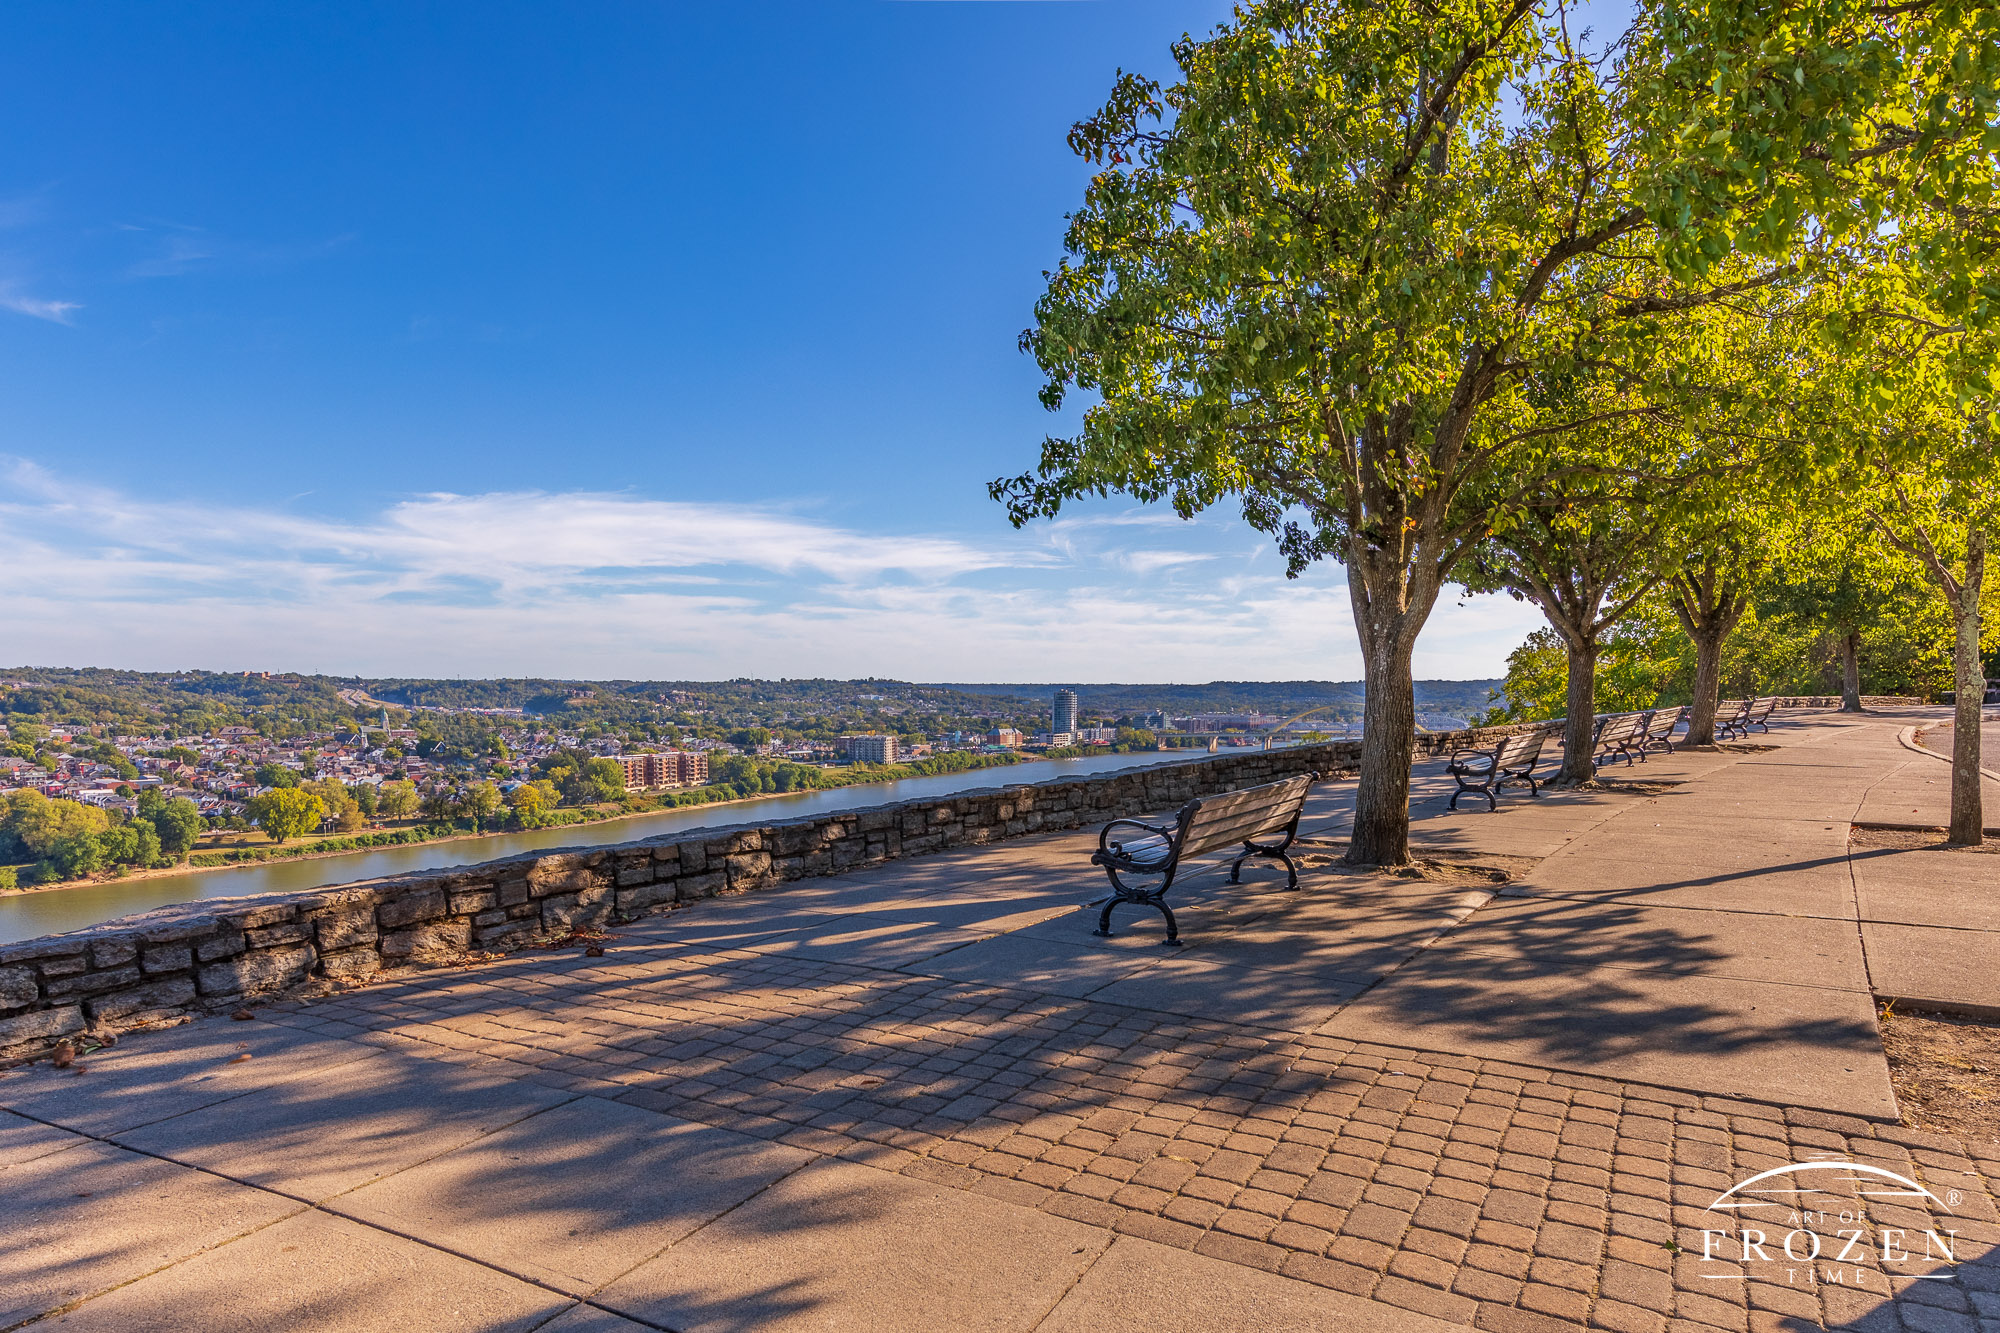 A stunning view from Twin Lake Overlook in Eden Park gives Cincinnati visitors a panoramic vista of the Ohio River and northern Kentucky